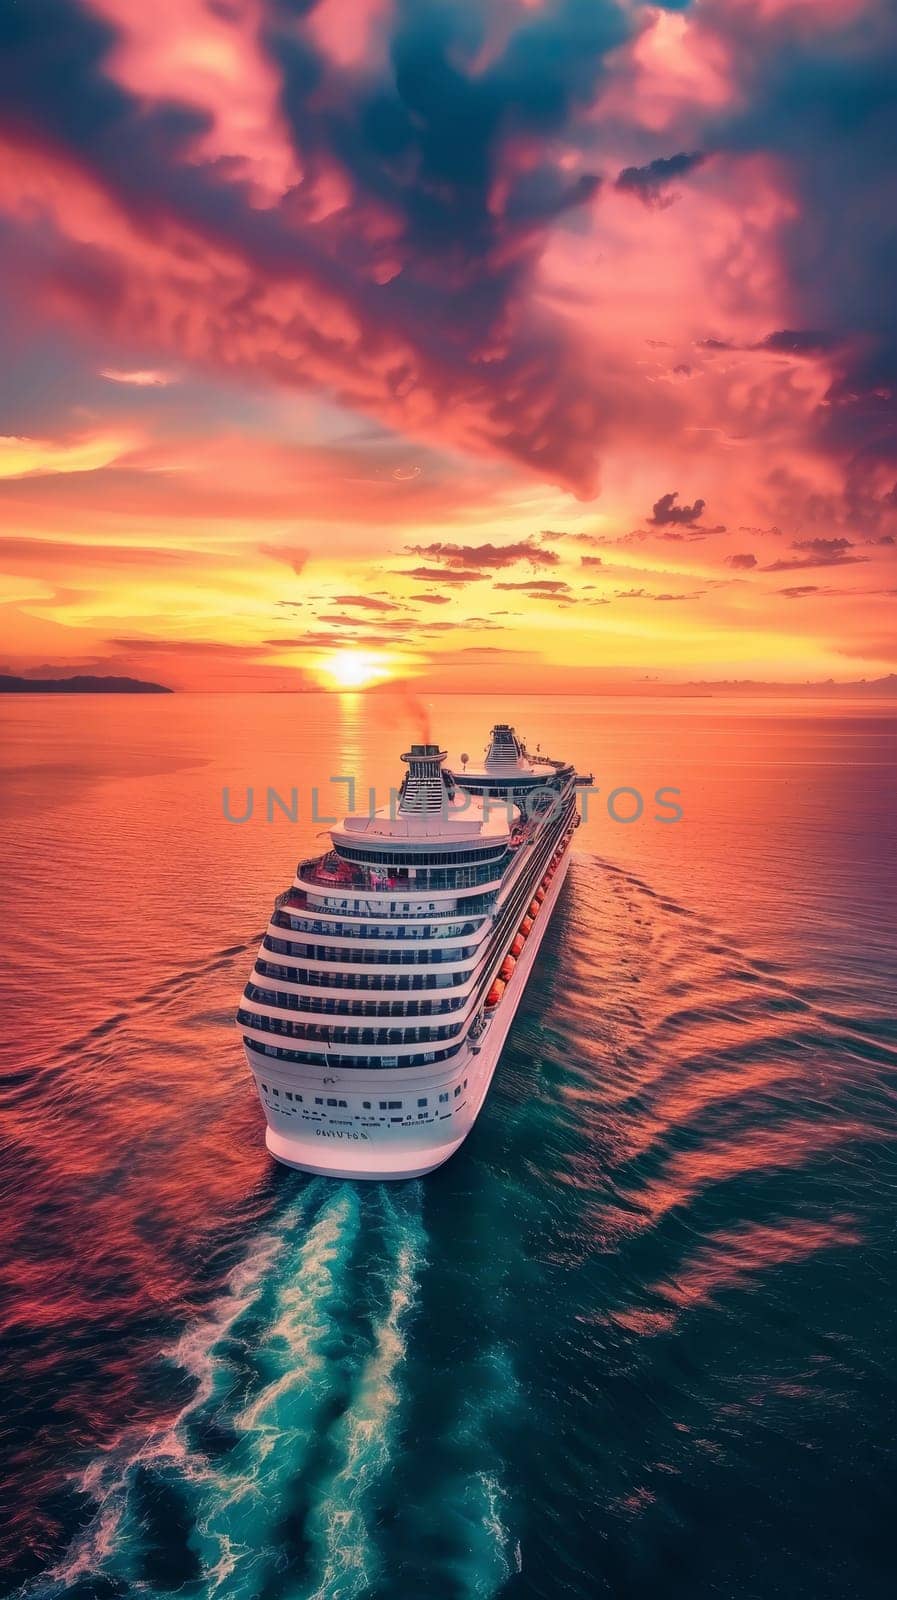 A luxury cruise ship sails through calm waters against a breathtaking sunset sky, offering a sense of grand travel adventures